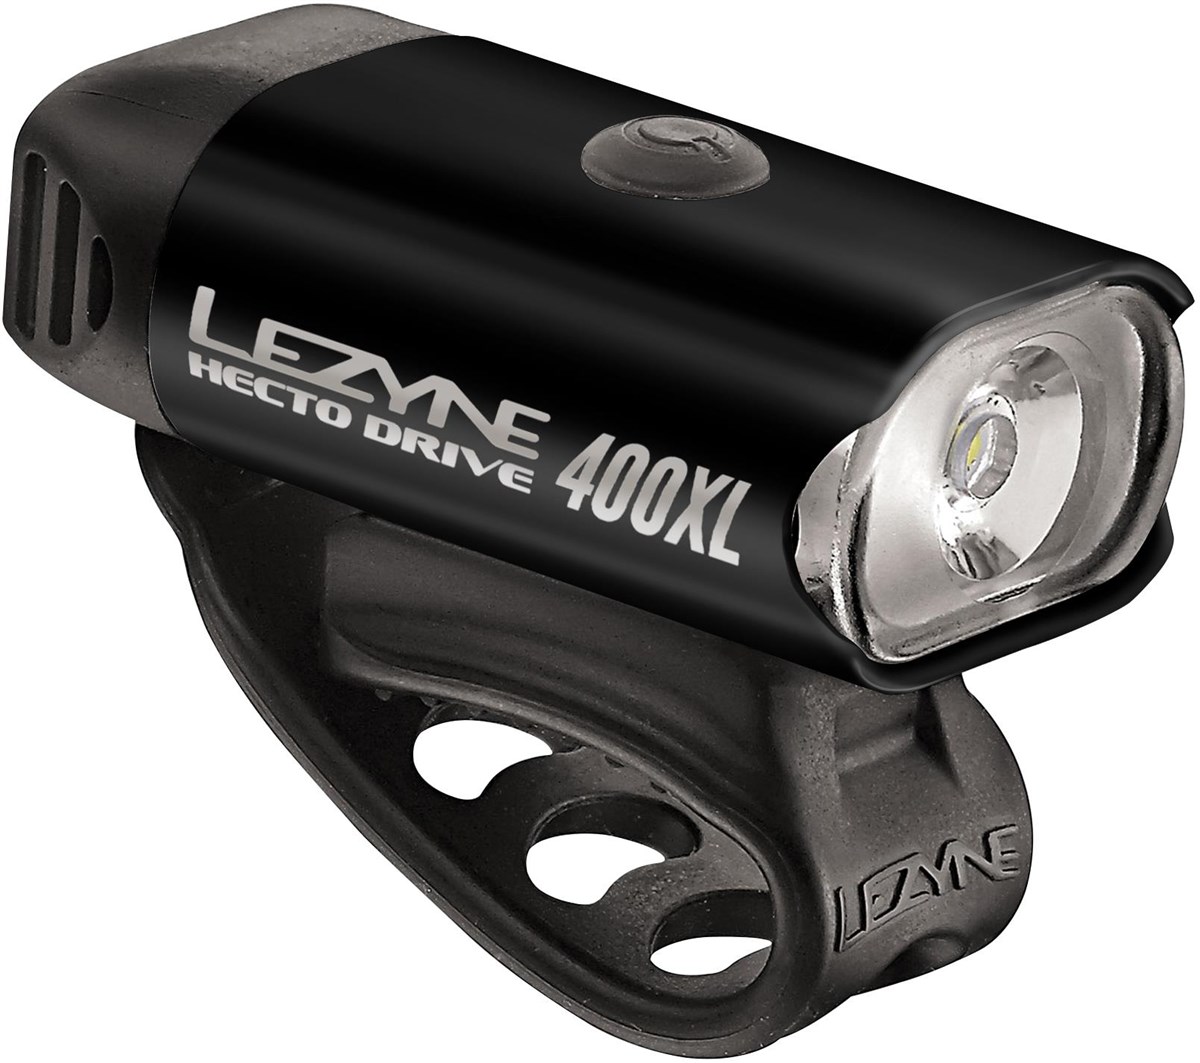 Lezyne Hecto Drive 400XL Front Light product image